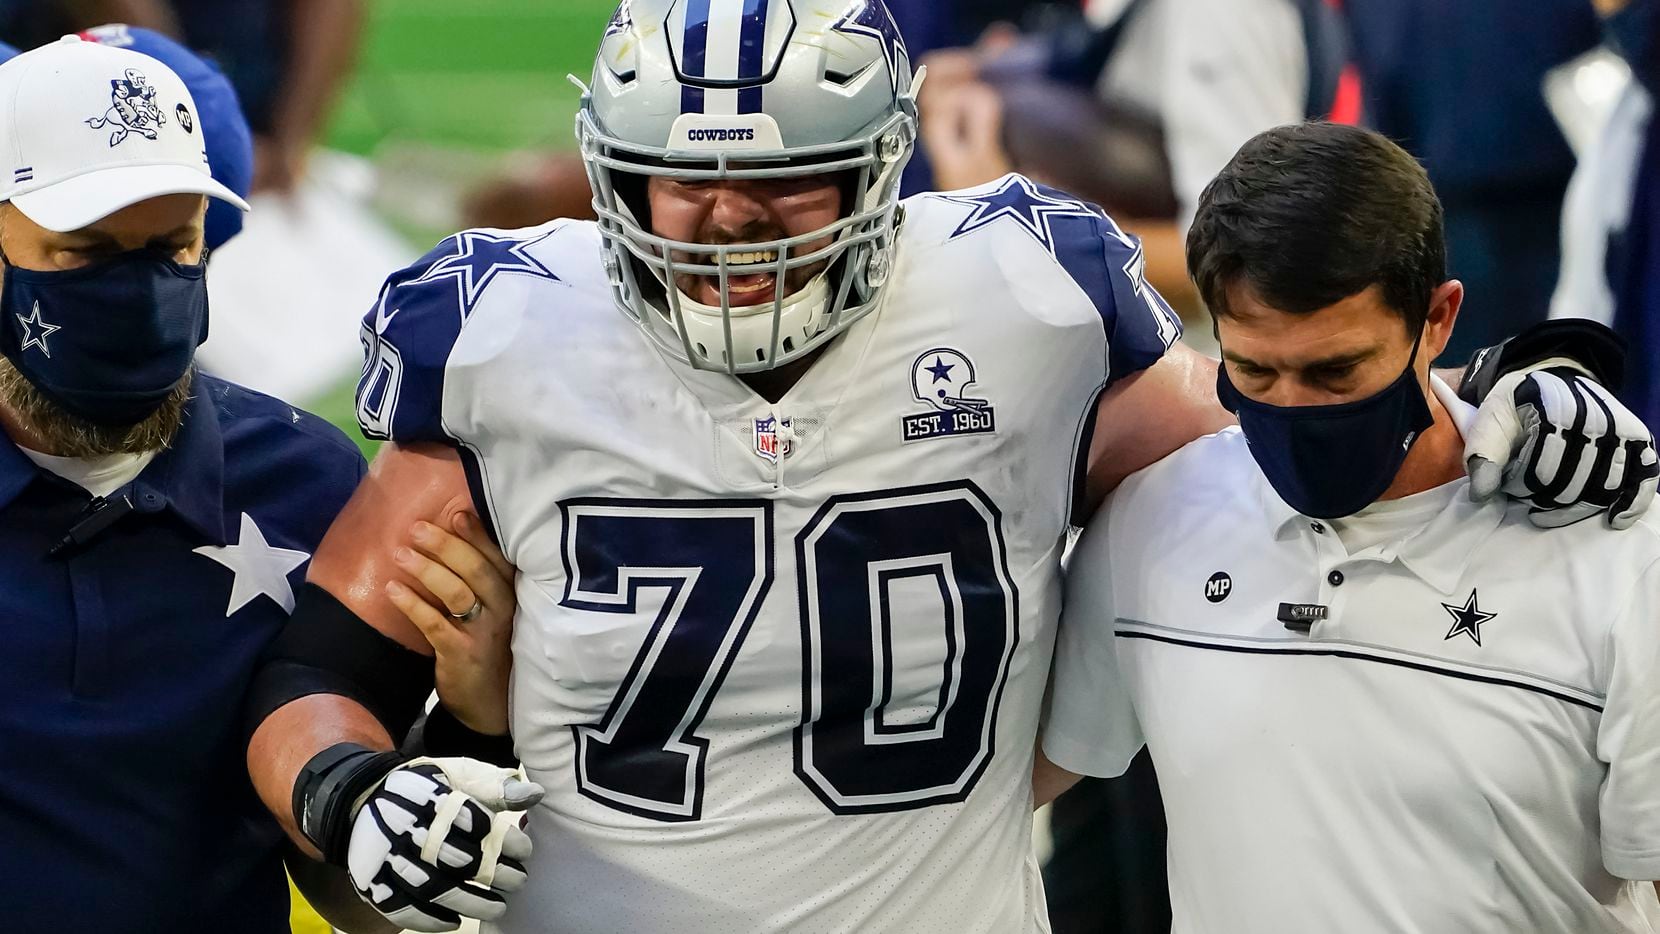 Cowboys right tackle Zack Martin is helped off the field after being injured during the first quarter of a game against Washington at AT&T Stadium on Thursday, Nov. 26, 2020, in Arlington.